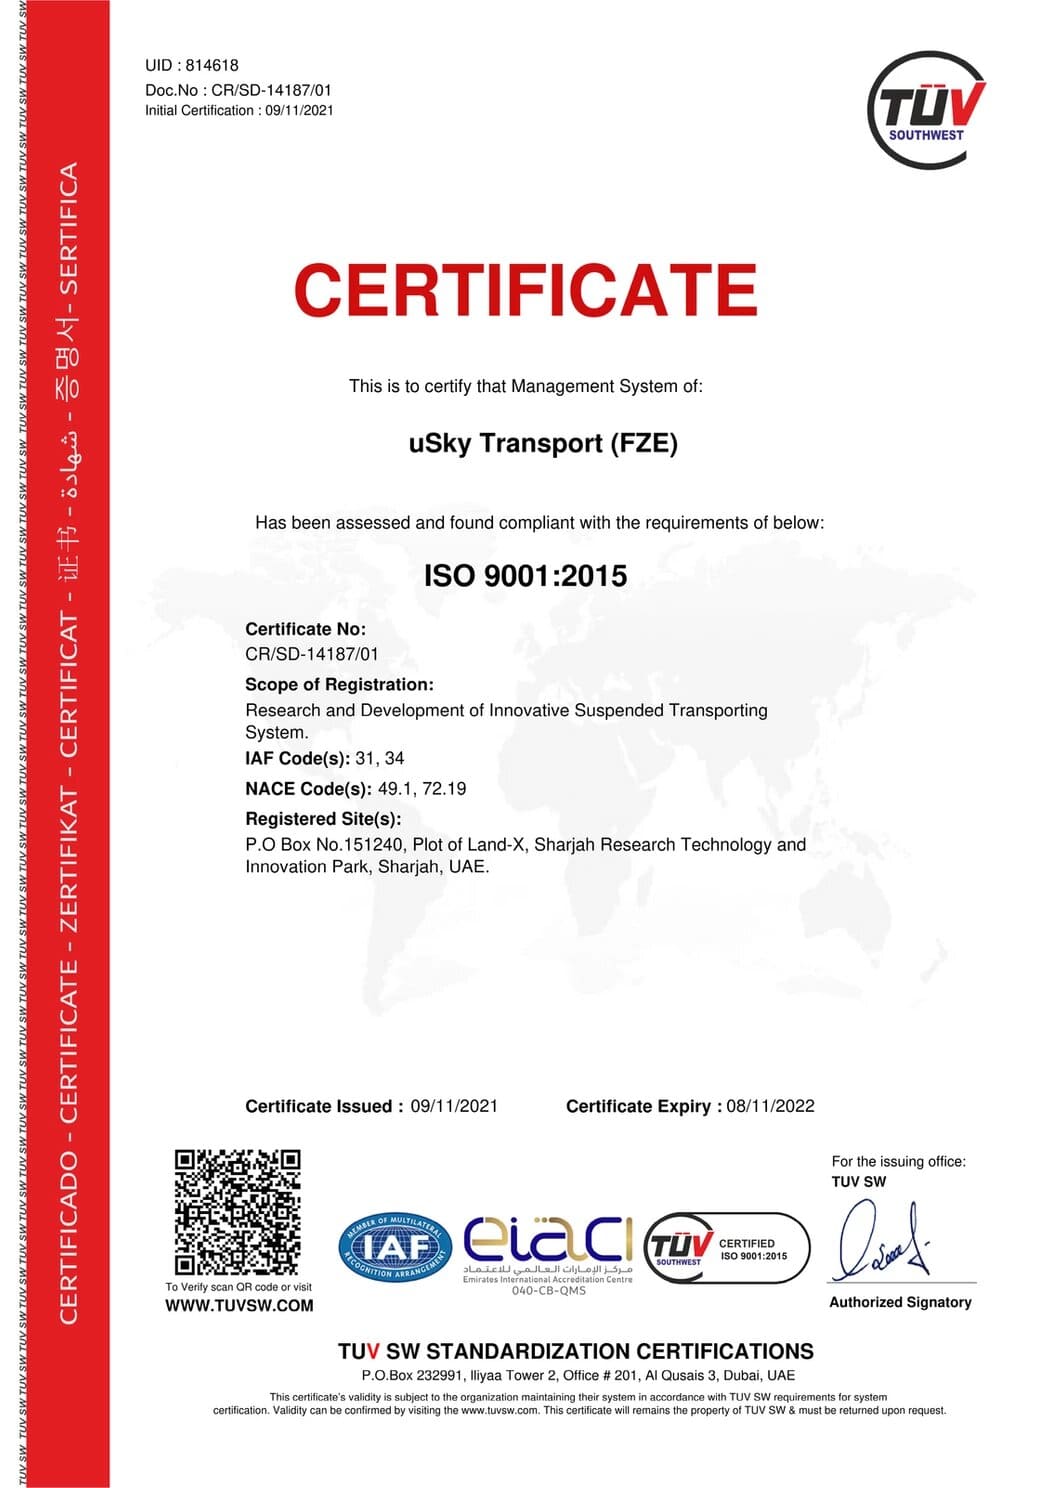 Quality management certificate ISO 9001 2015 issued to uSky Transport